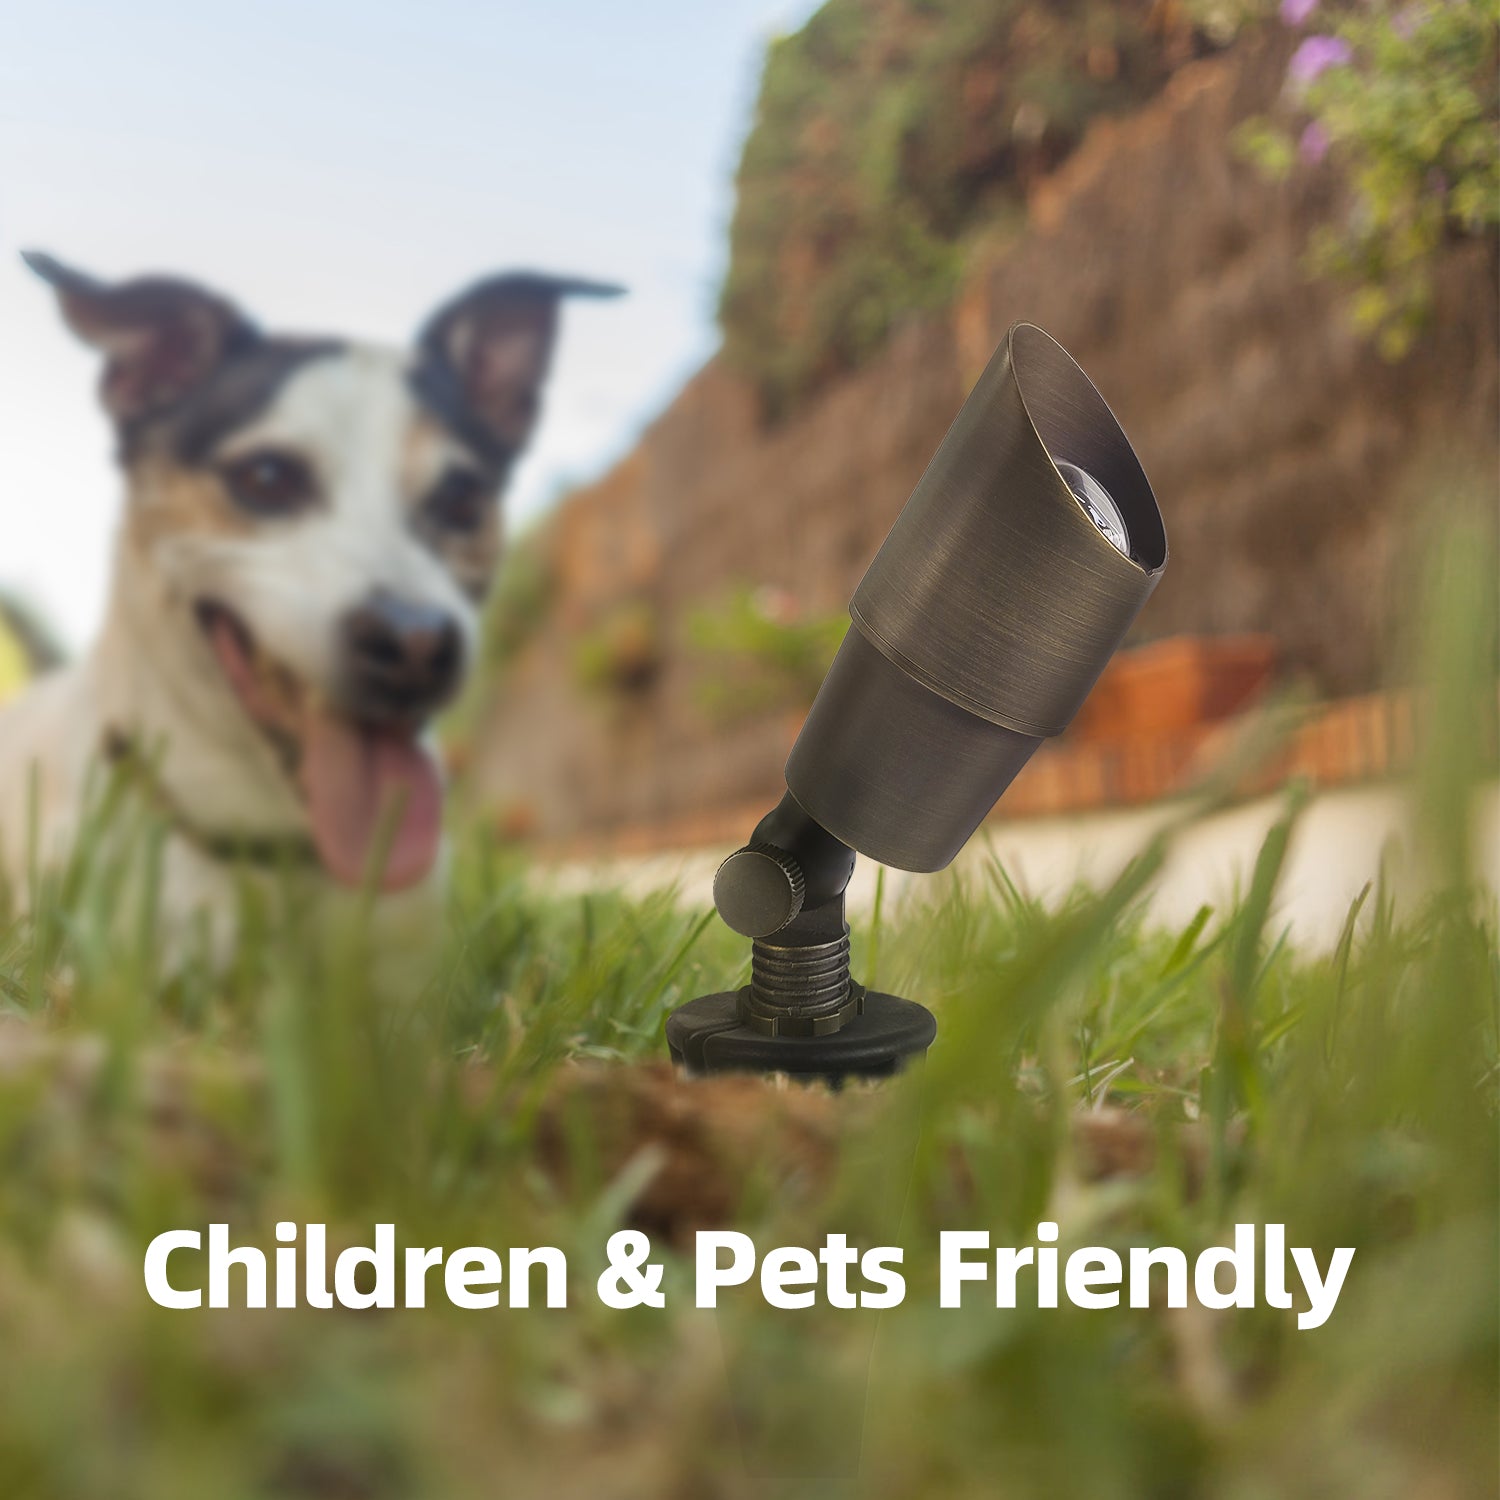 Brass LED landscape spotlight in a garden with a dog in the background, featuring 'Children & Pets Friendly' text.